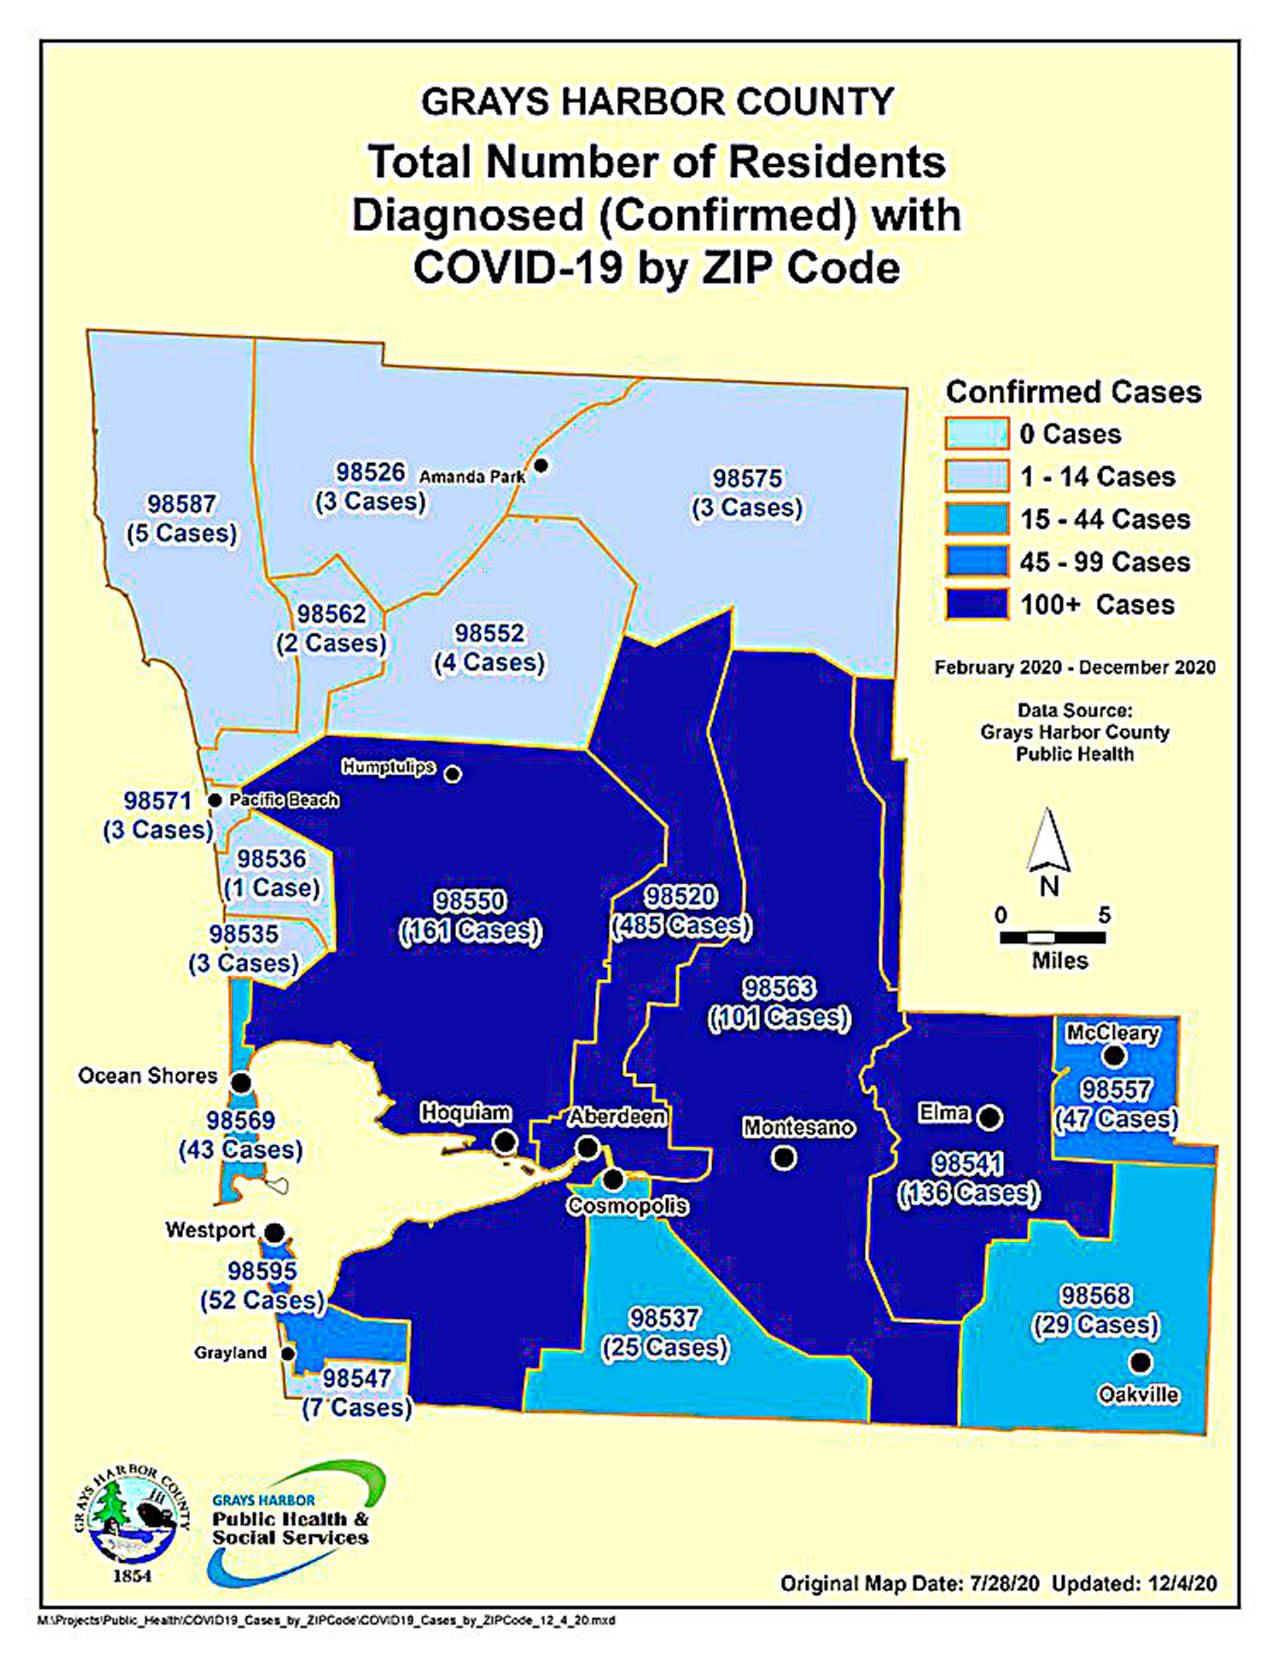 COVID-19 cases in Grays Harbor County by zip code, updated Friday, Dec. 4.